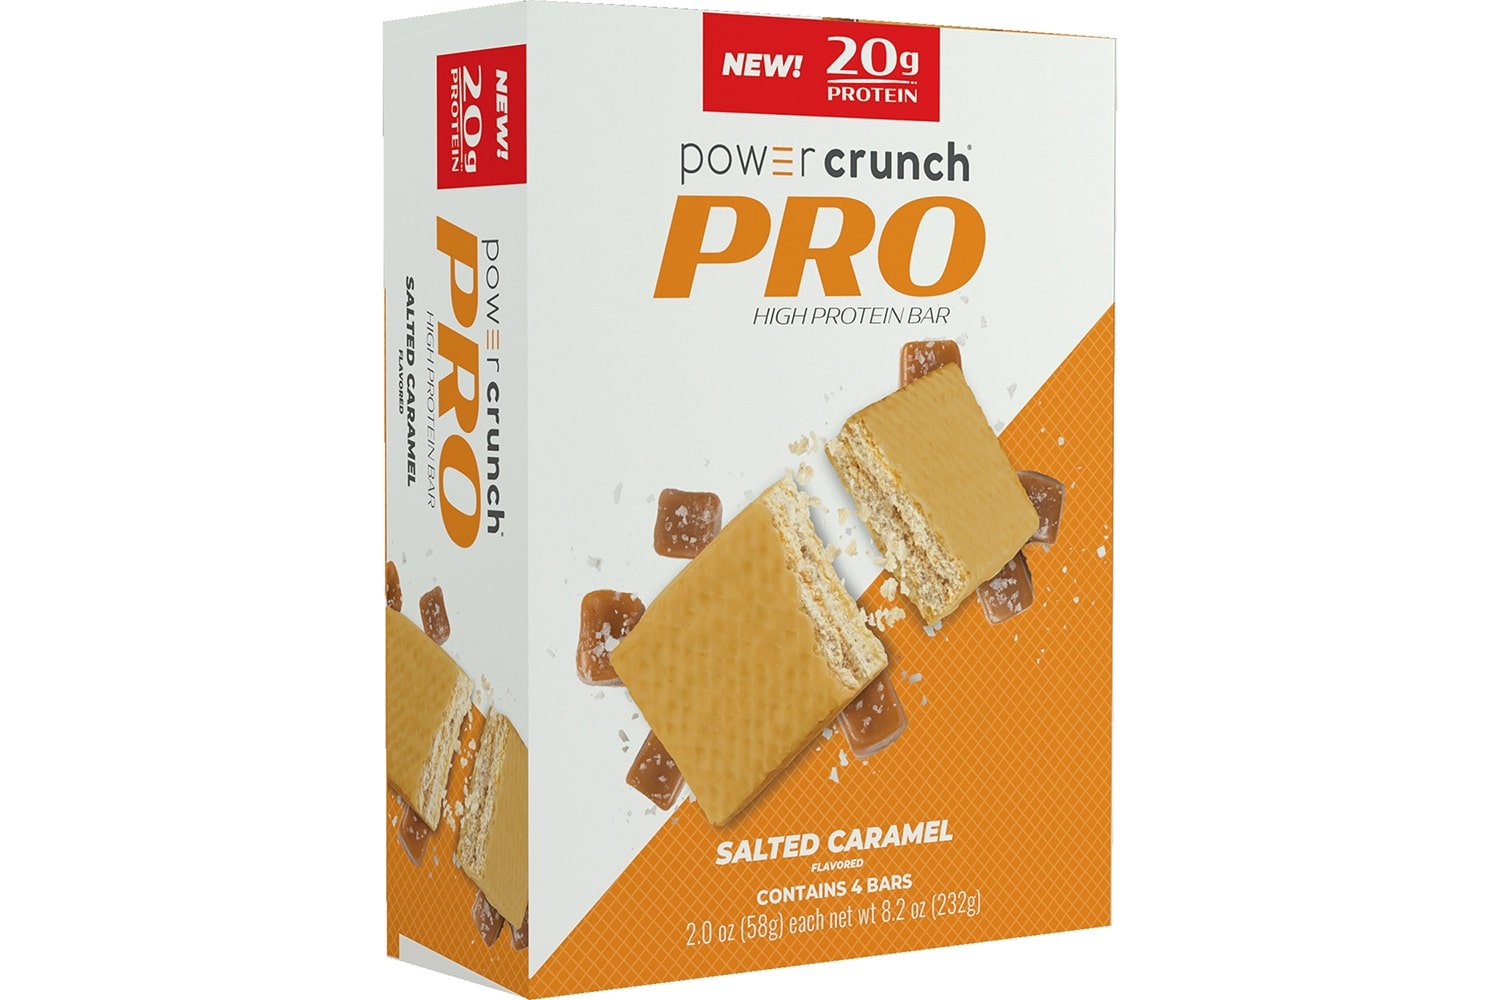 Box of Power Crunch Pro Salted Caramel 20g protein bars